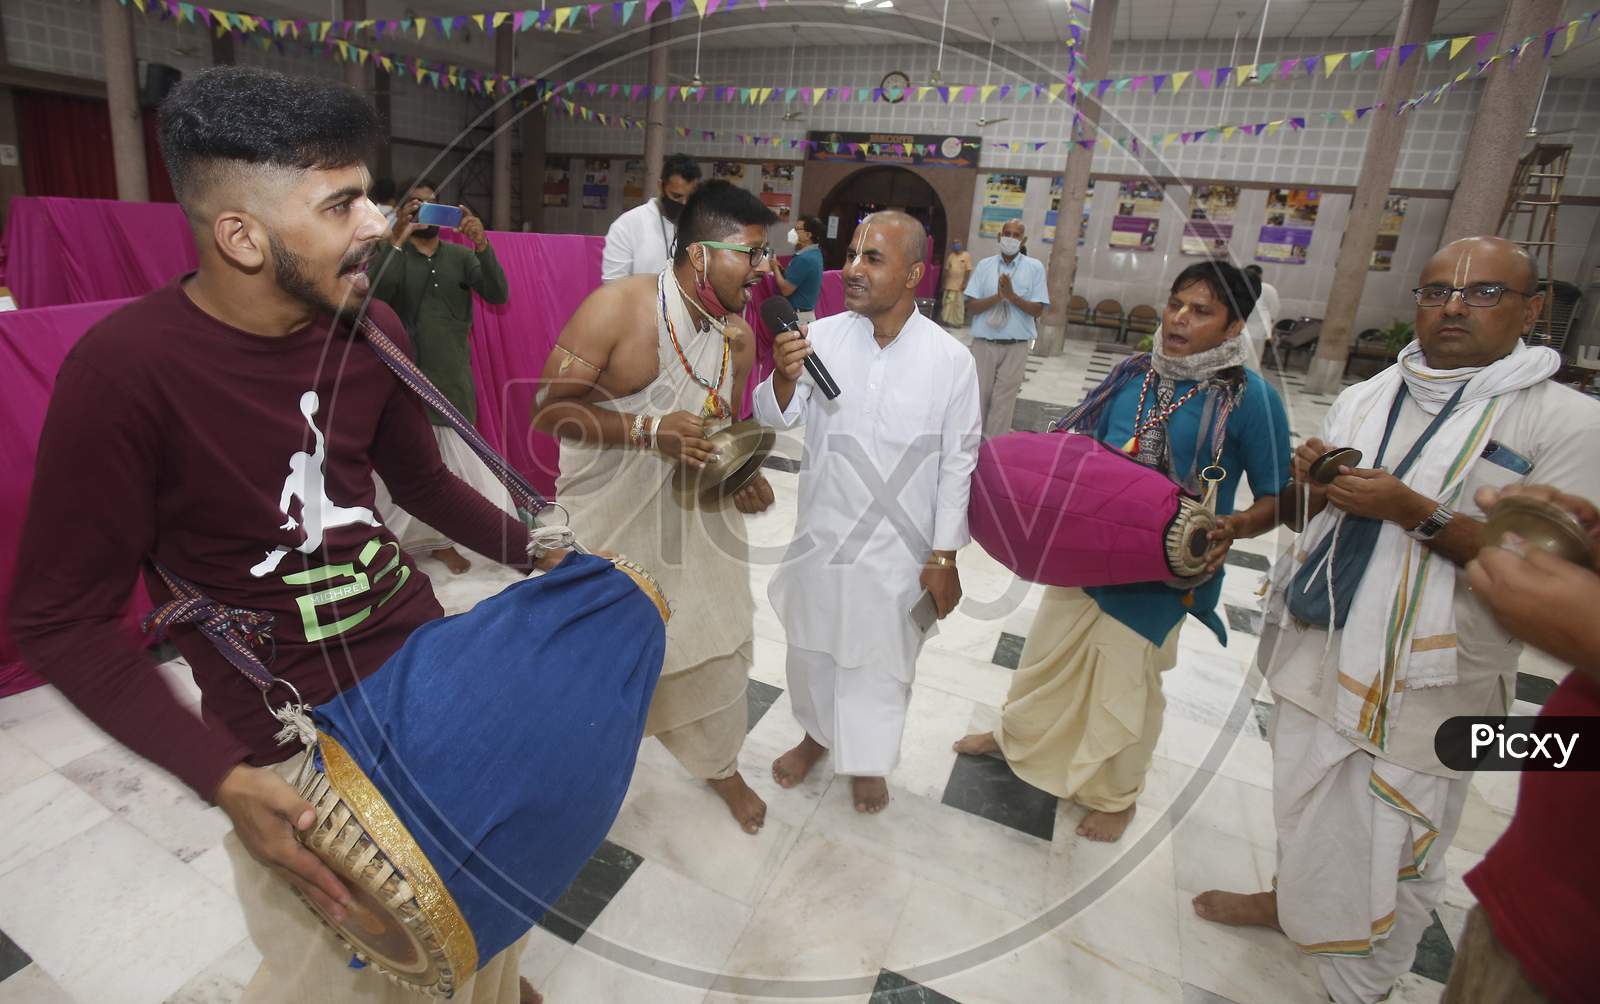 Devotees sing devotional songs  during Janmashtami celebrations at ISKCON (The International Society for Krishna Consciousness) temple in Chandigarh August 12, 2020